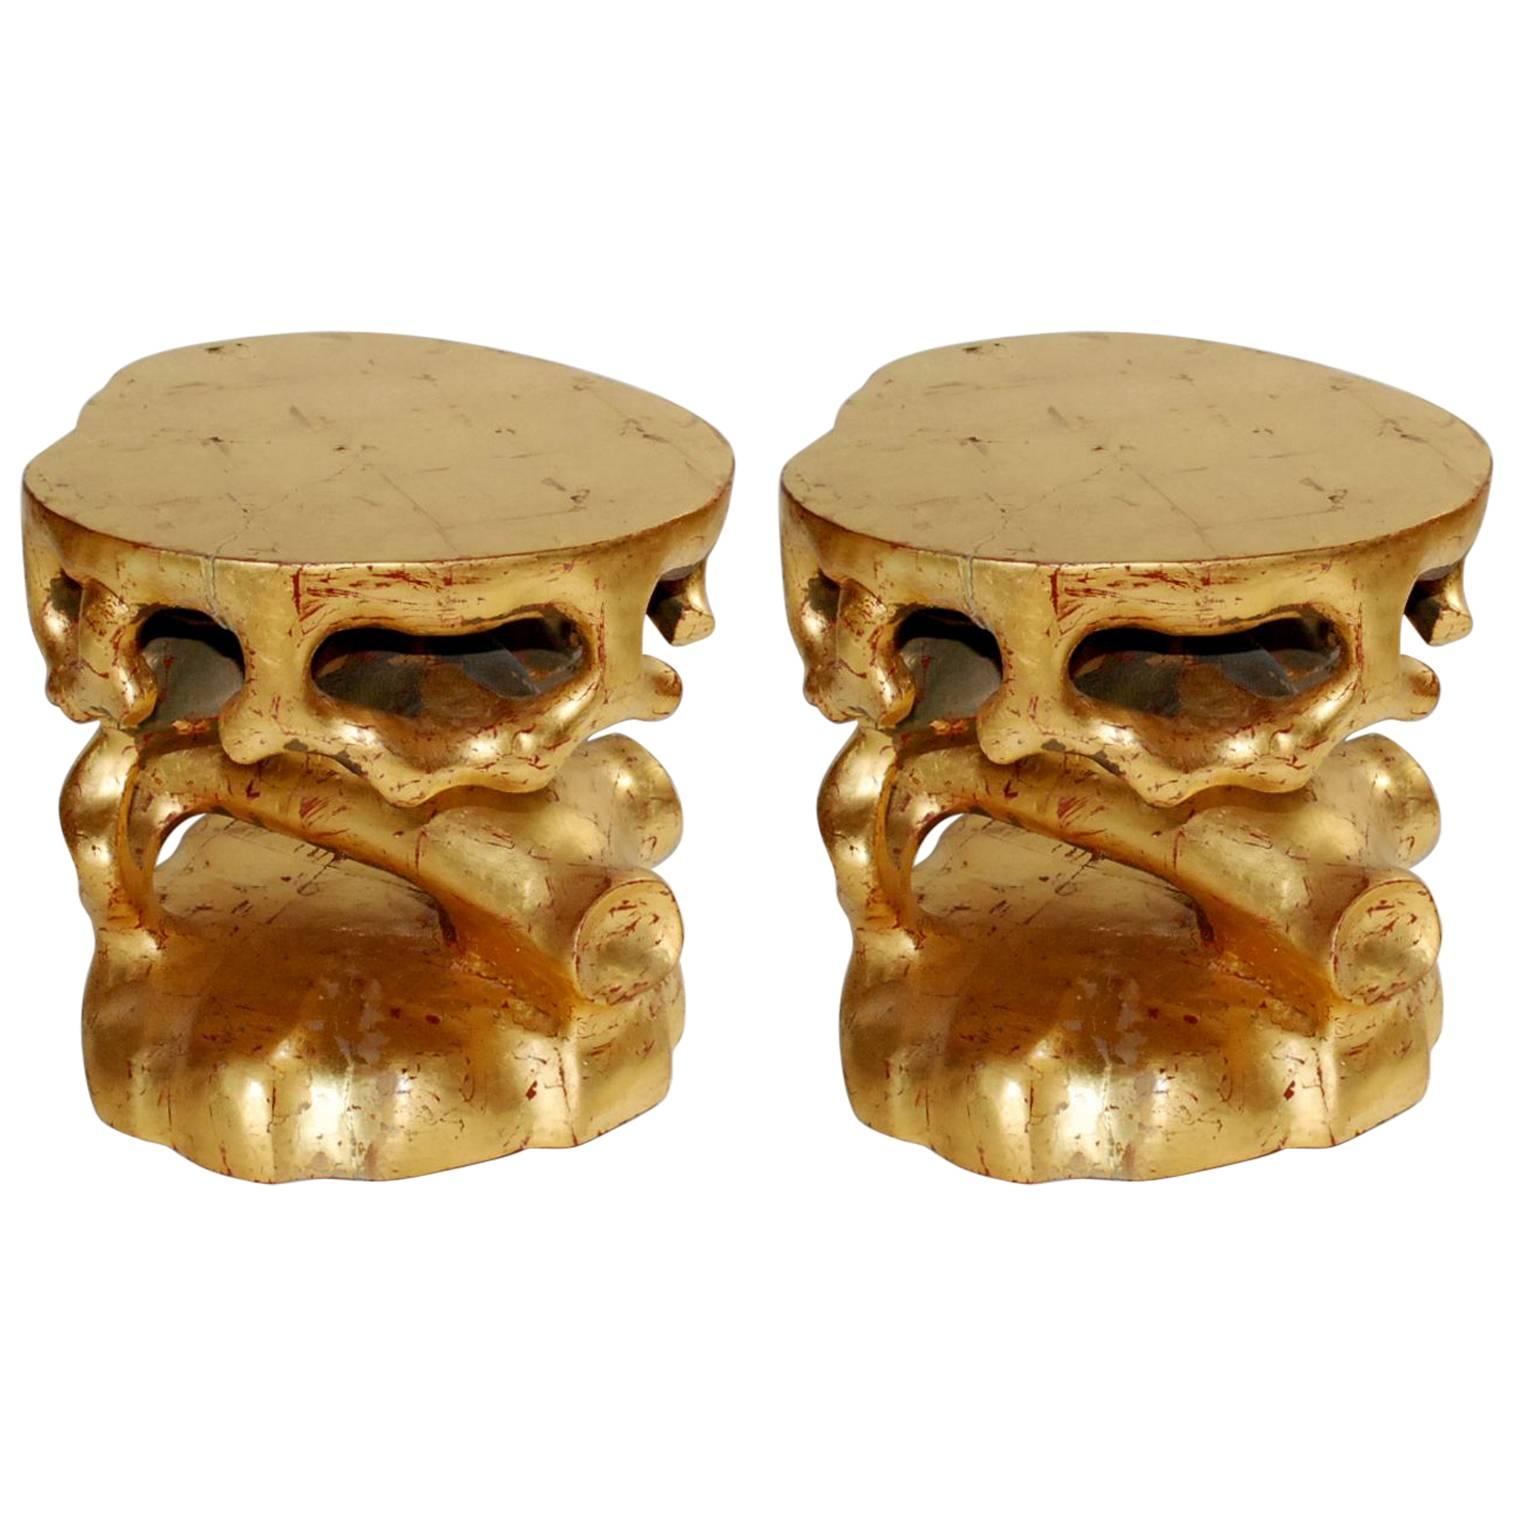 Pair of Truffle Design Side Tables